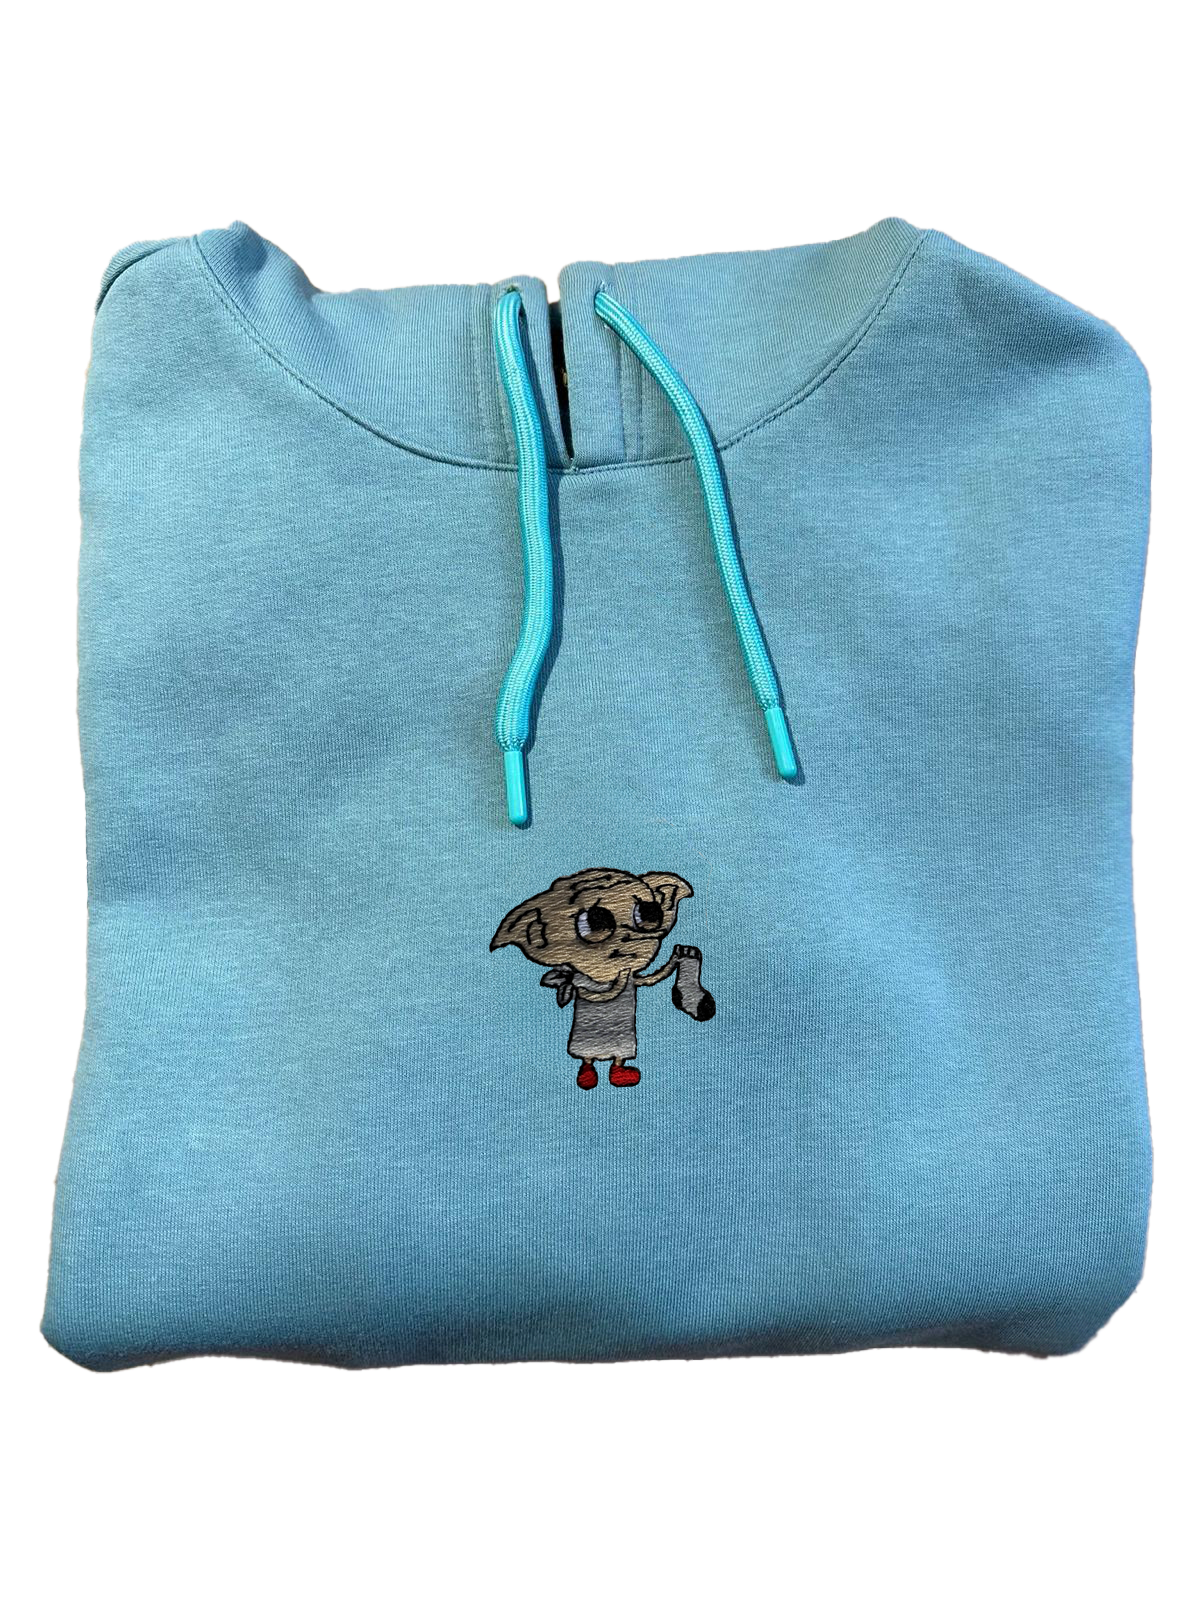 Embroidered Dobby "Free Genie" Oversize T-Shirt/Hoodie/Tote Bag